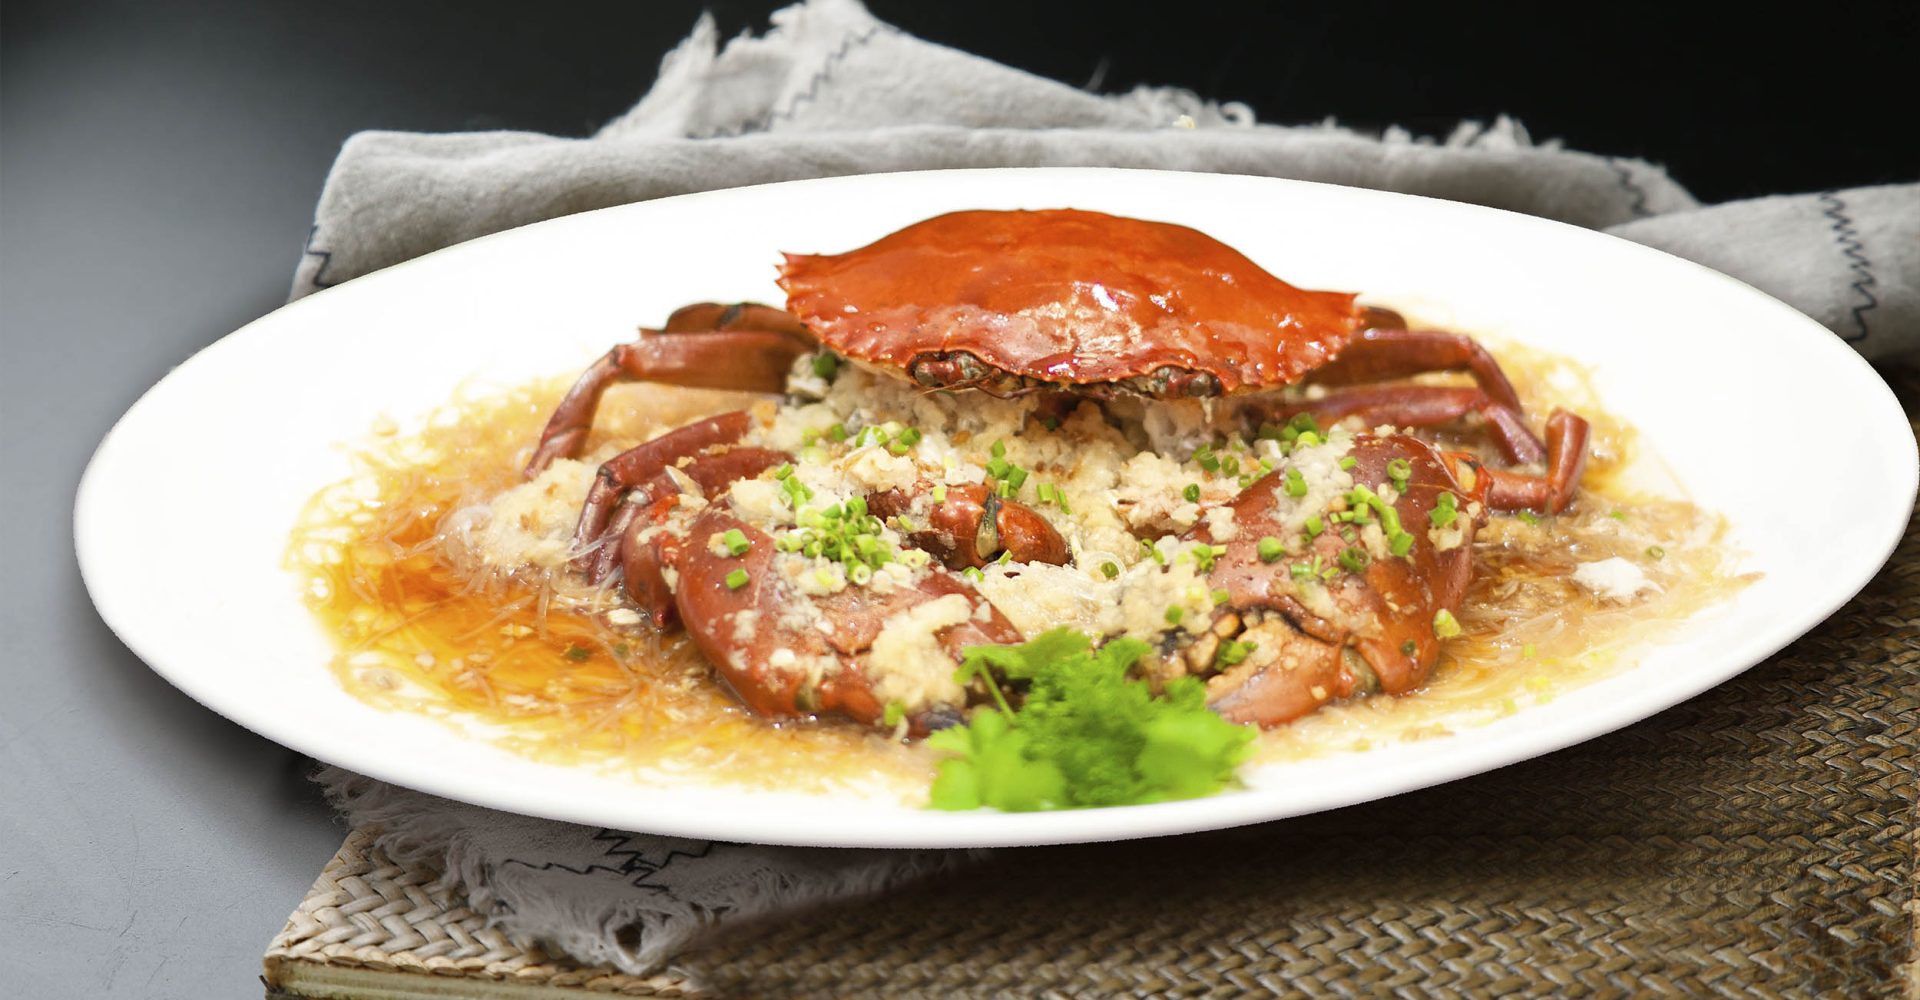 Xiu Live Seafood (crab) - Steamed crab with garlic and vermicelli